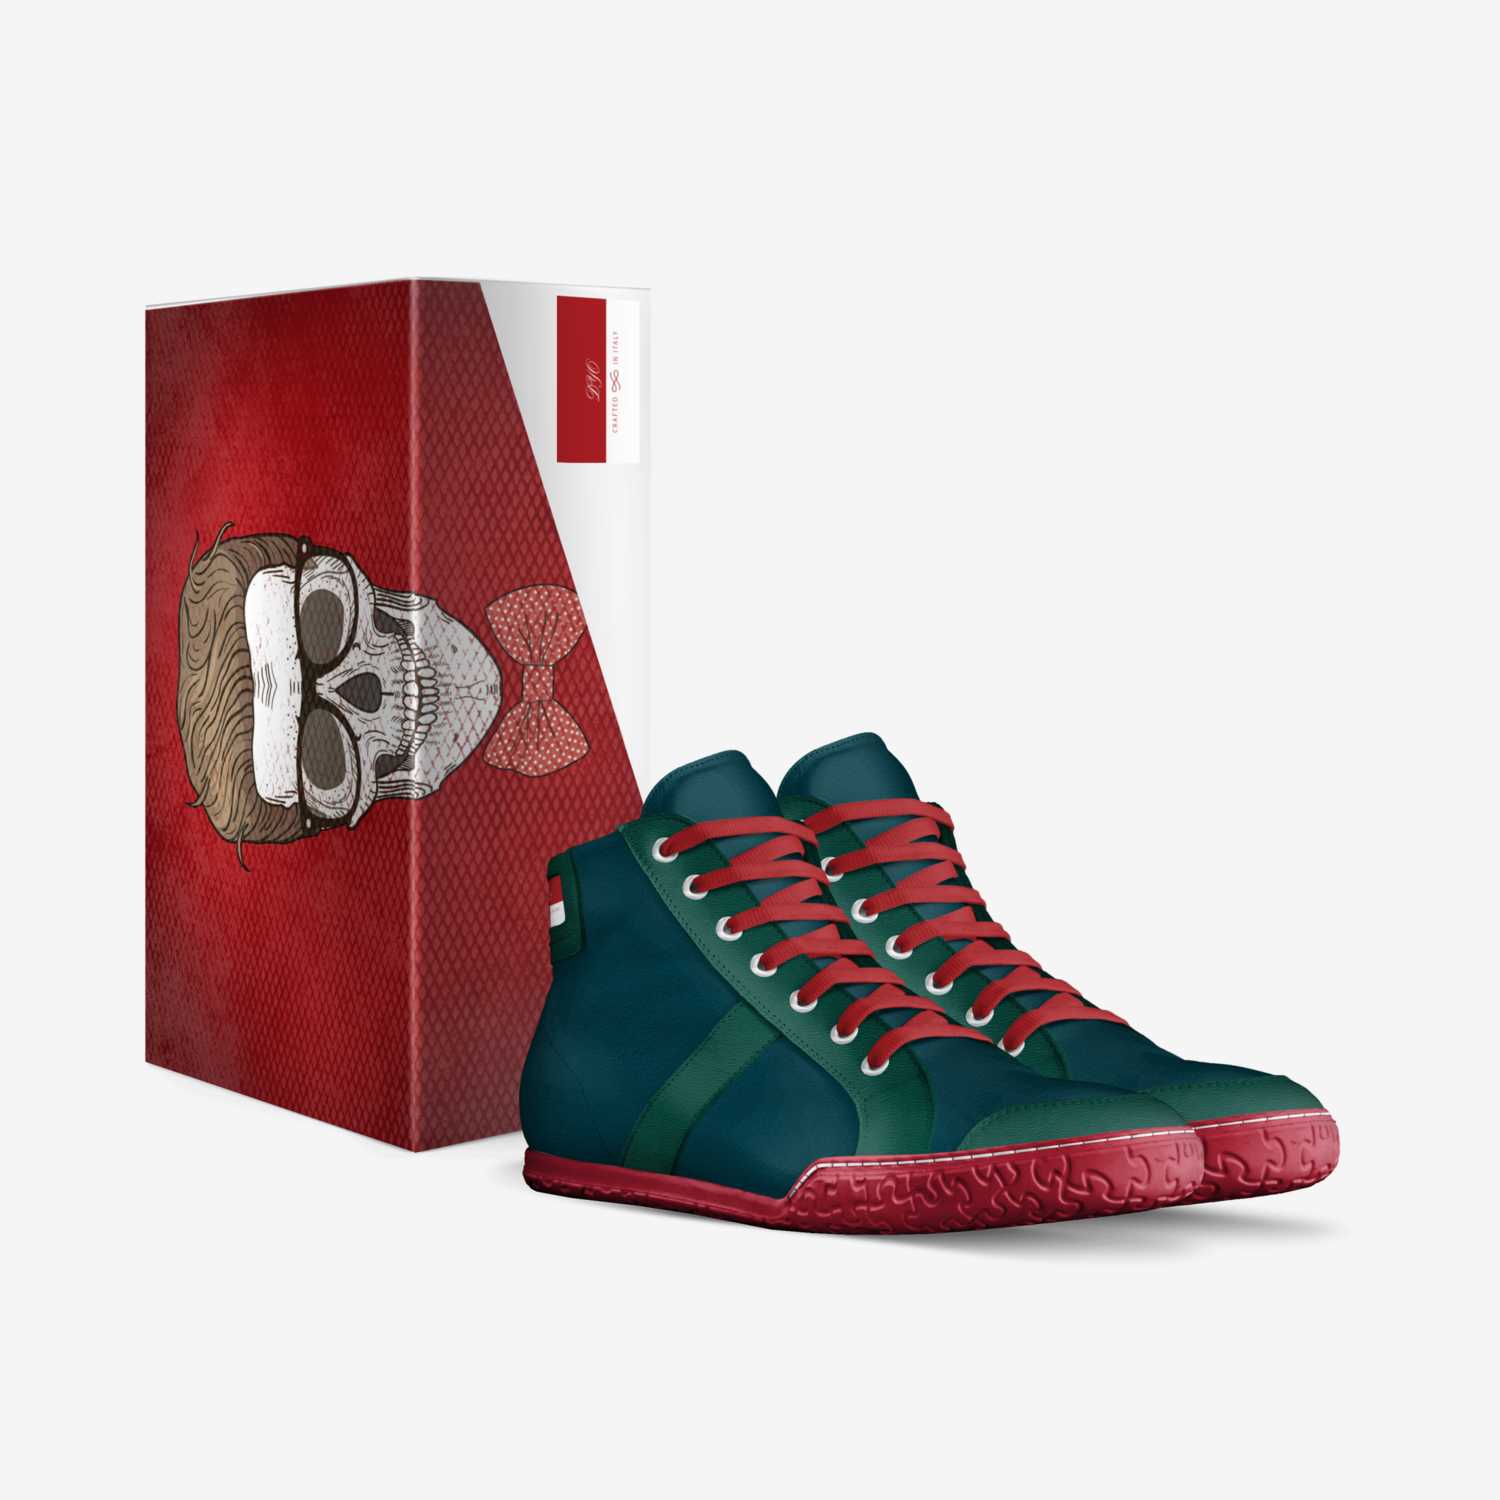 DY100 custom made in Italy shoes by Darryl Nealy | Box view